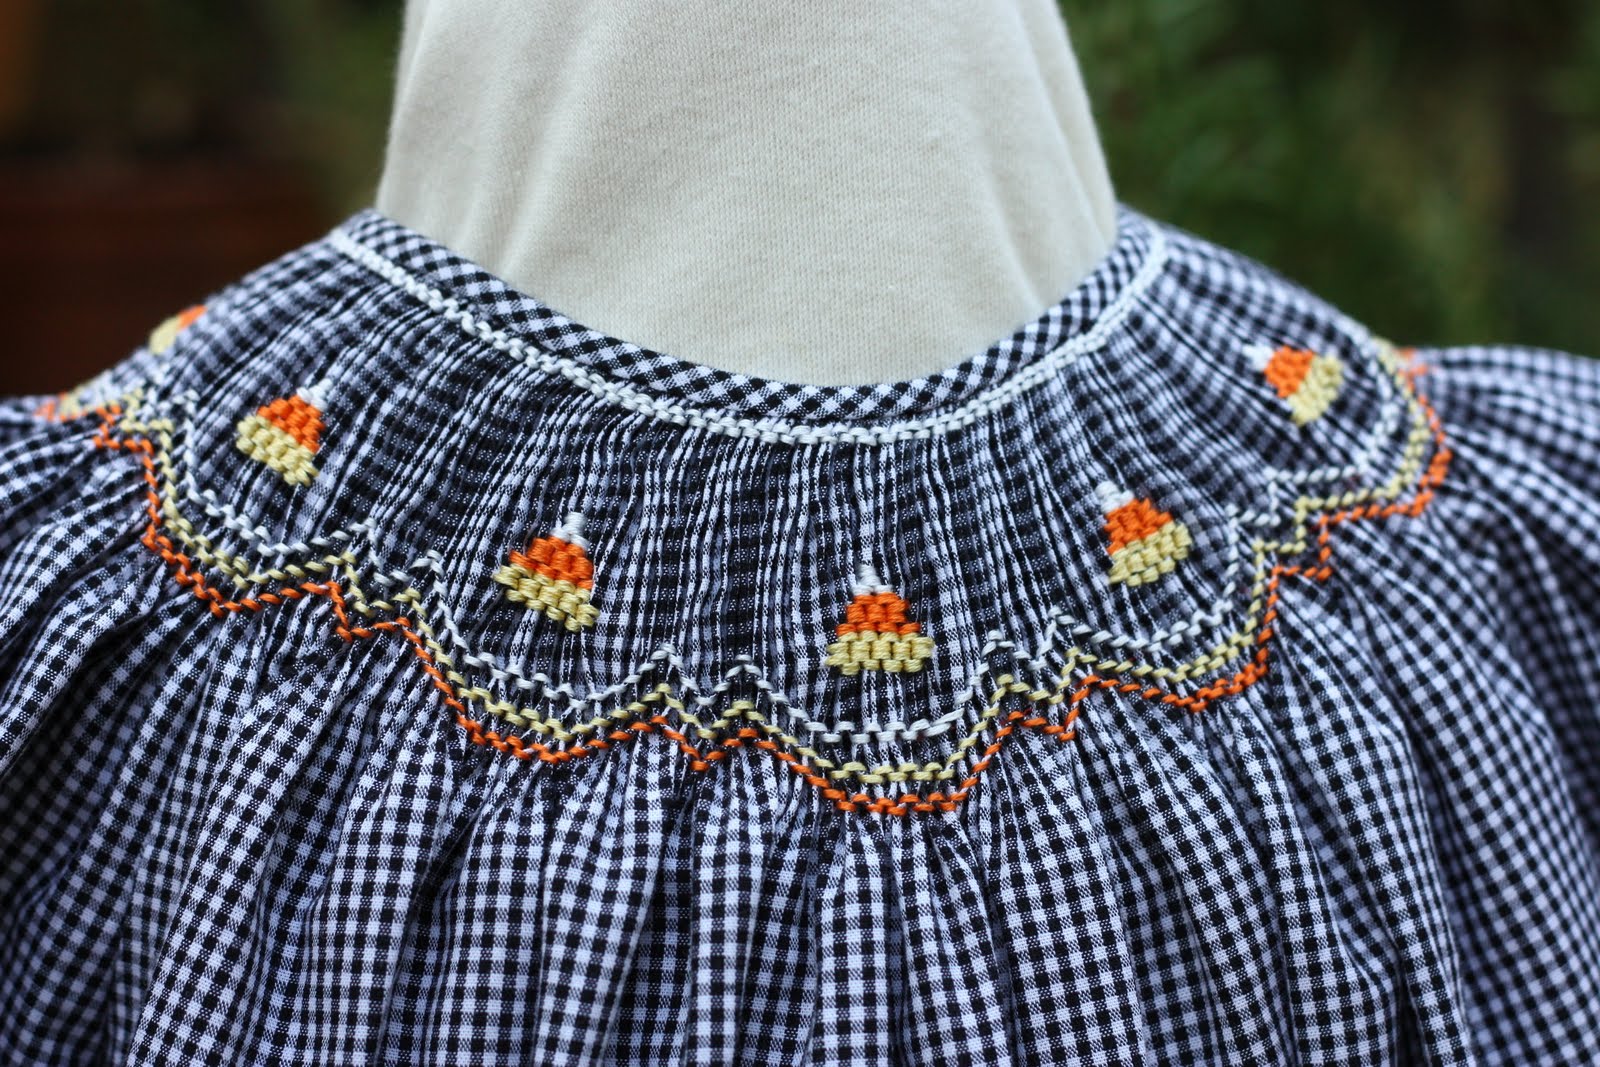 creations-by-michie-blog-candy-corn-smocking-design